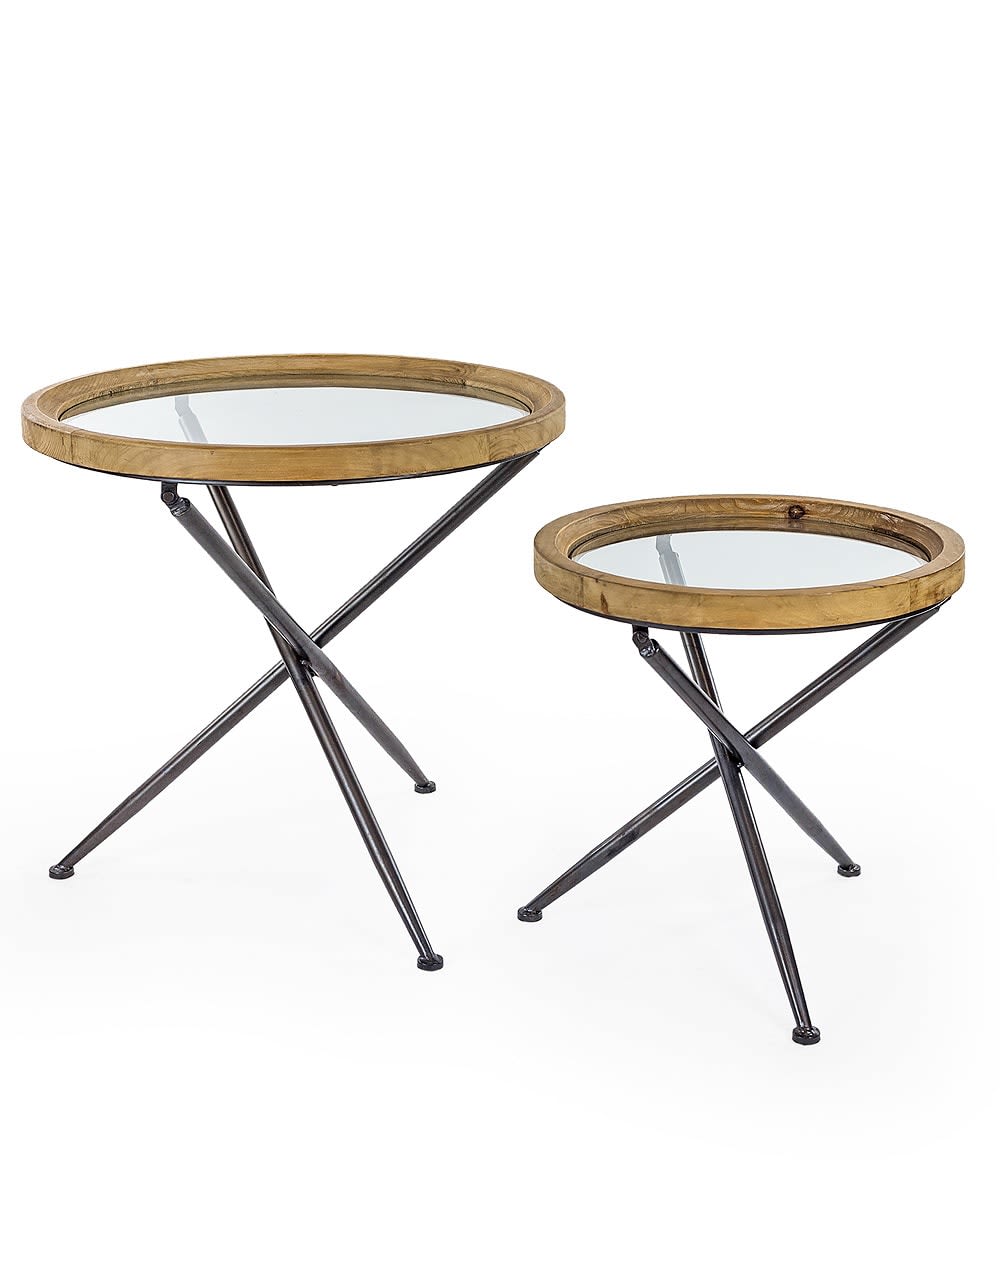 Set of 2 Round Wooden Tripod Side Tables